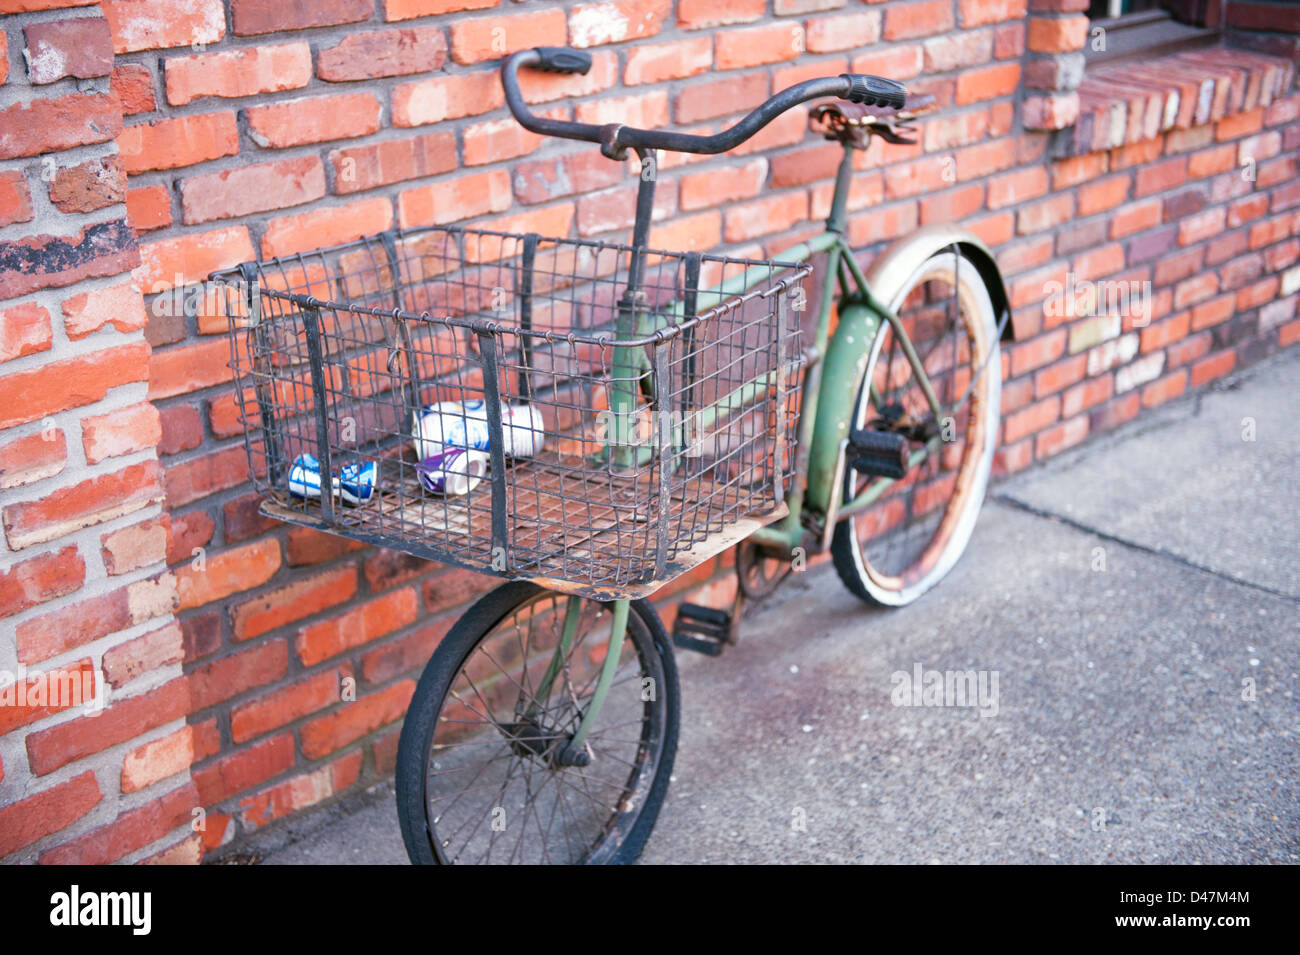 A vintage bicycle against a red brick wall with trash in basket Stock Photo